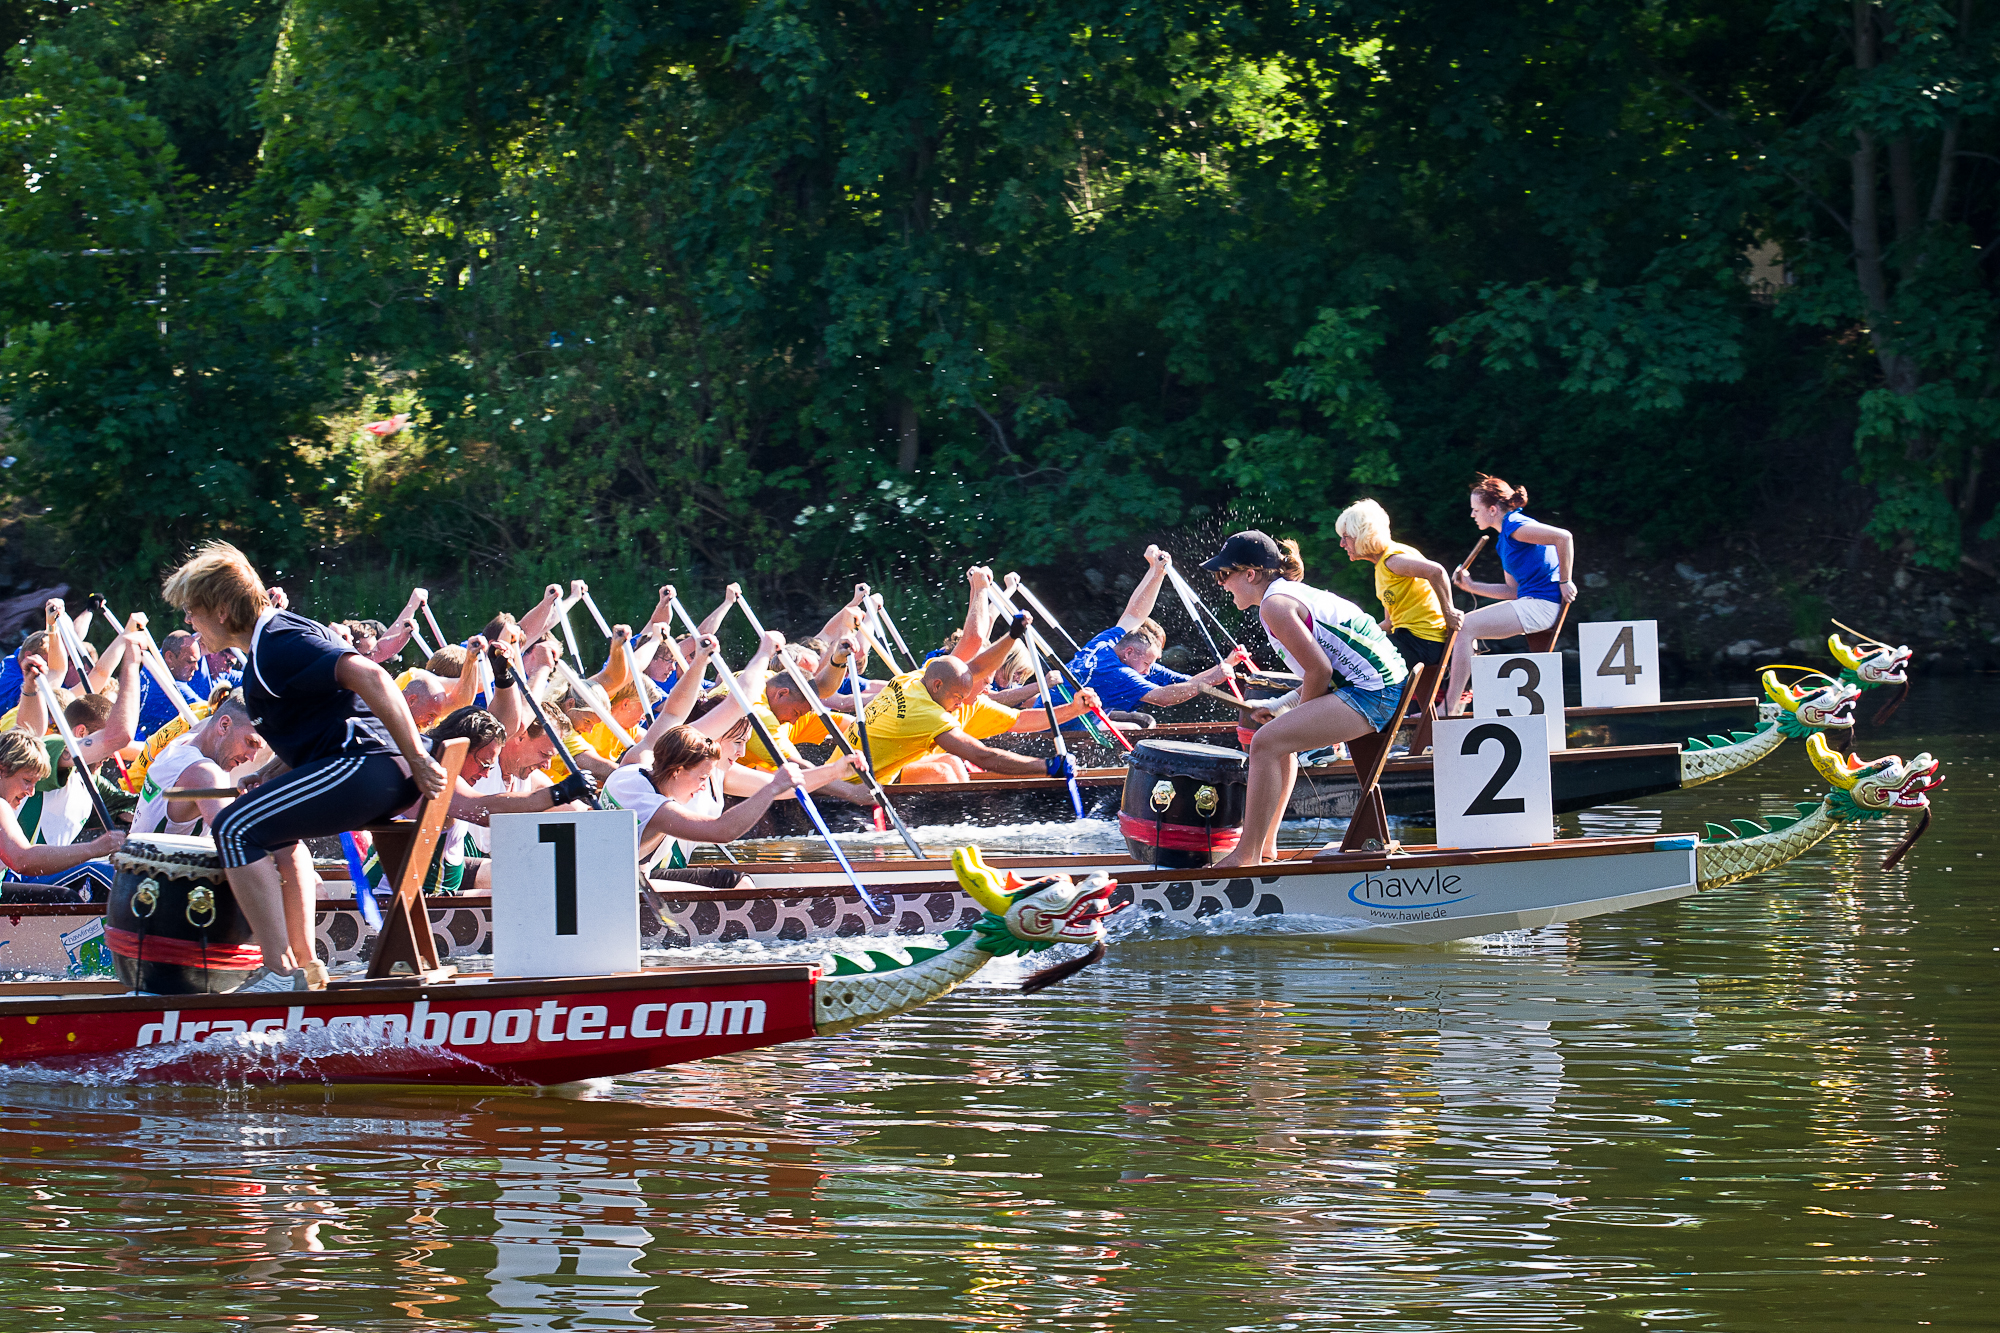 two teams of men race through the water in canoes